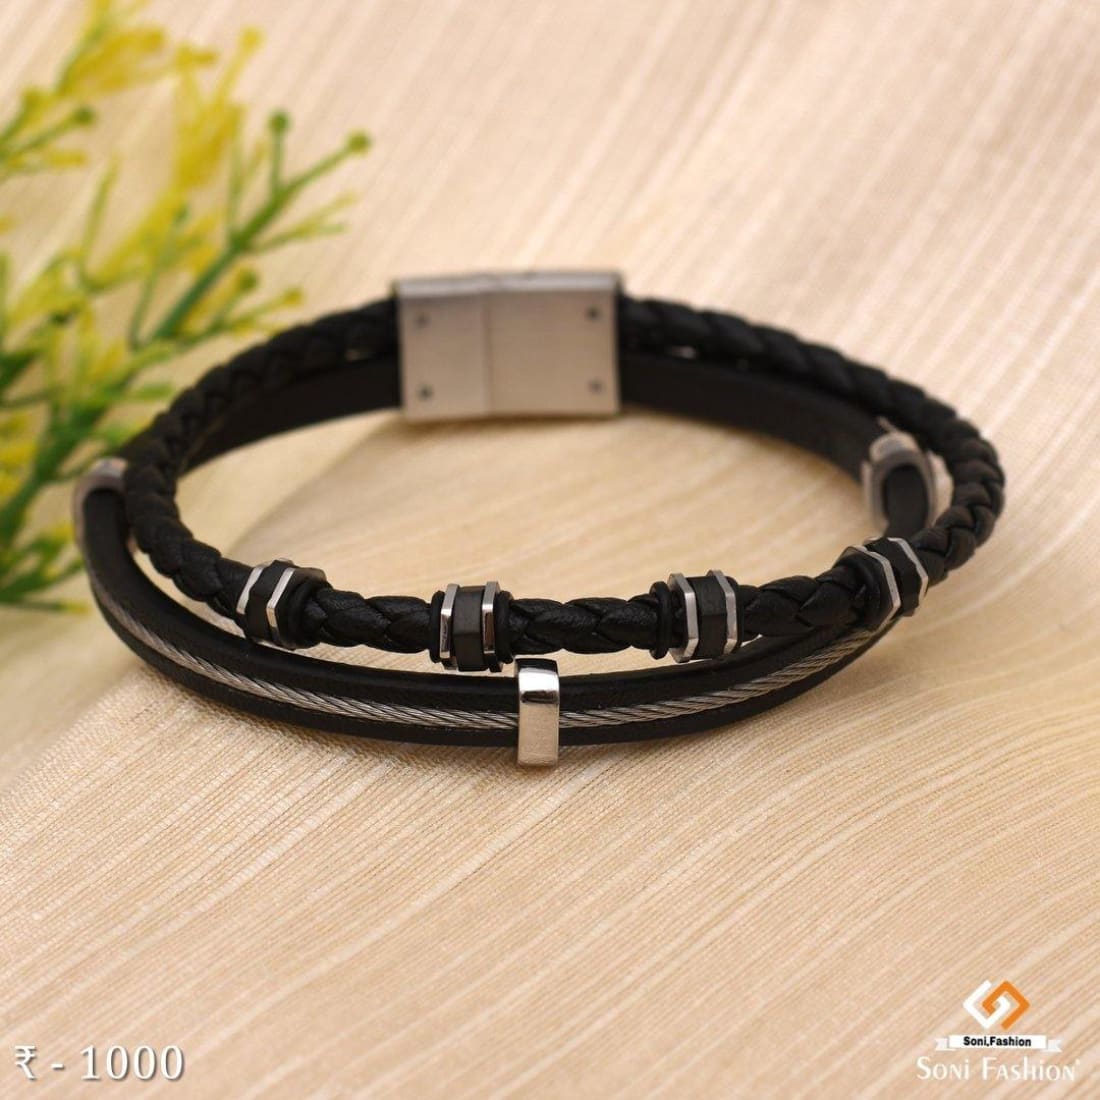 Fashion Frill Leather Silver Bracelet Price in India - Buy Fashion Frill Leather  Silver Bracelet Online at Best Prices in India | Flipkart.com